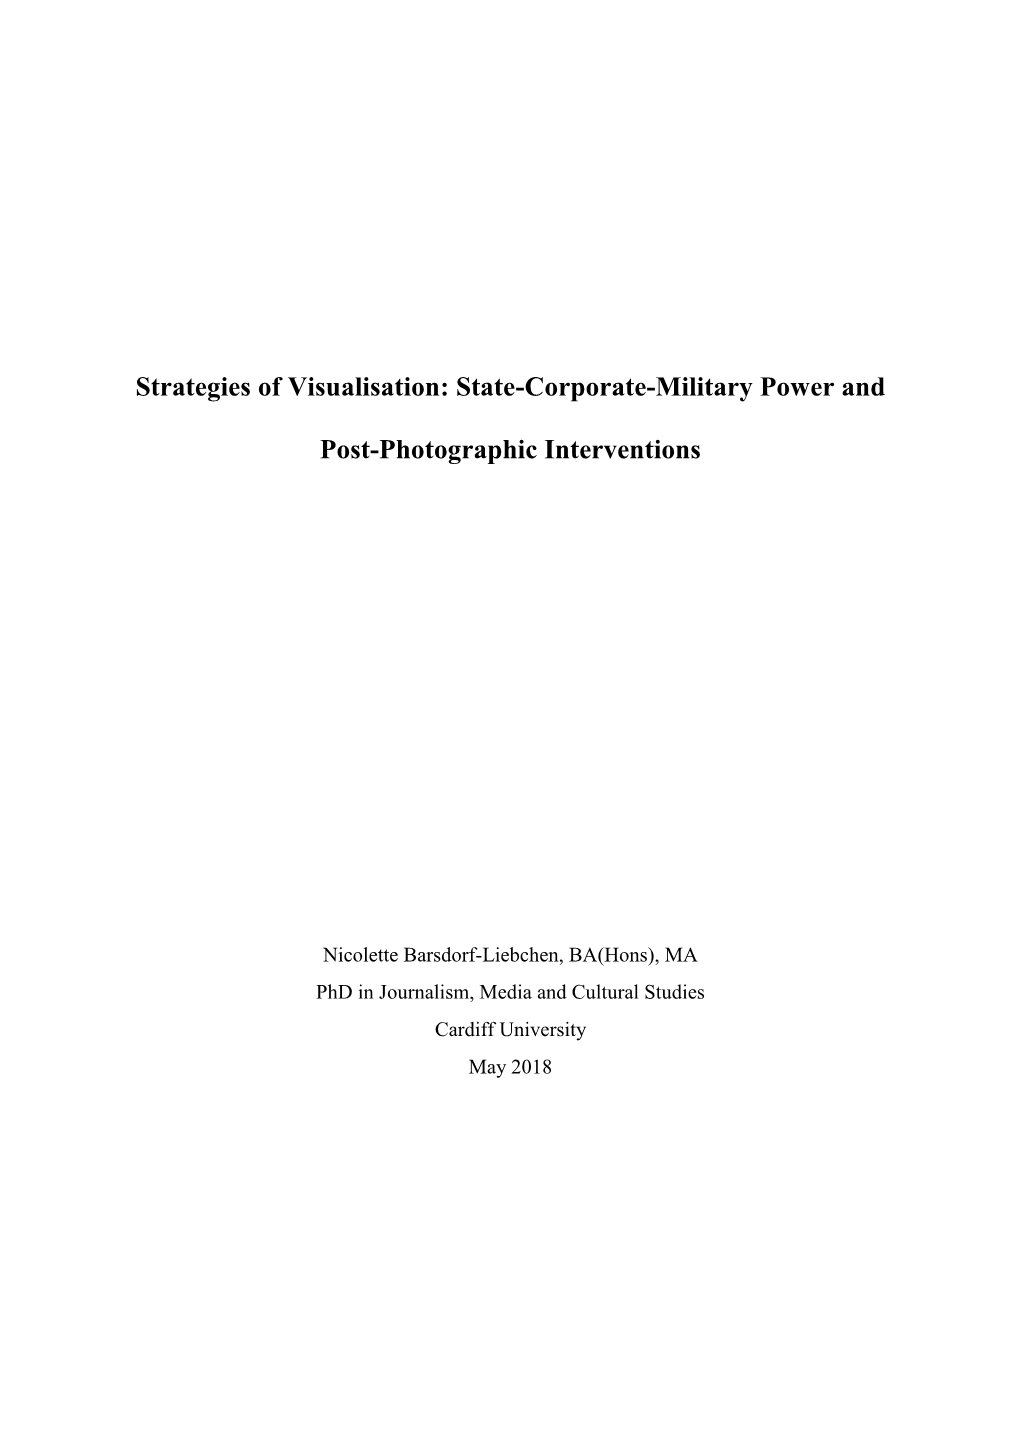 State-Corporate-Military Power and Post-Photographic Interventions